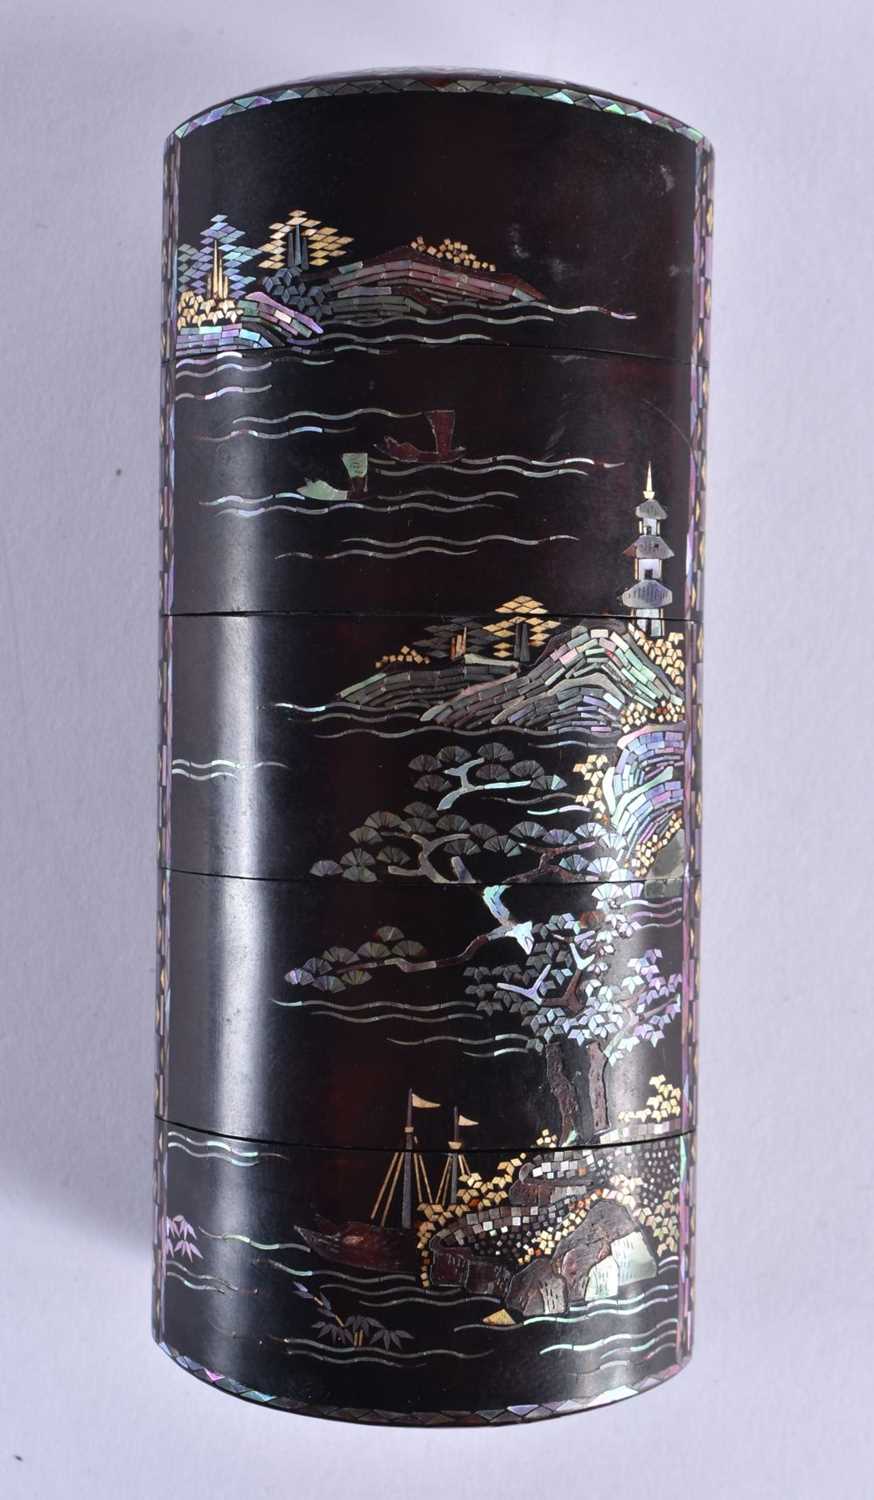 AN UNUSUAL 18TH/19TH CENTURY JAPANESE EDO PERIOD LAC BURGATE FOUR CASE INRO inlaid in mother of - Image 6 of 8